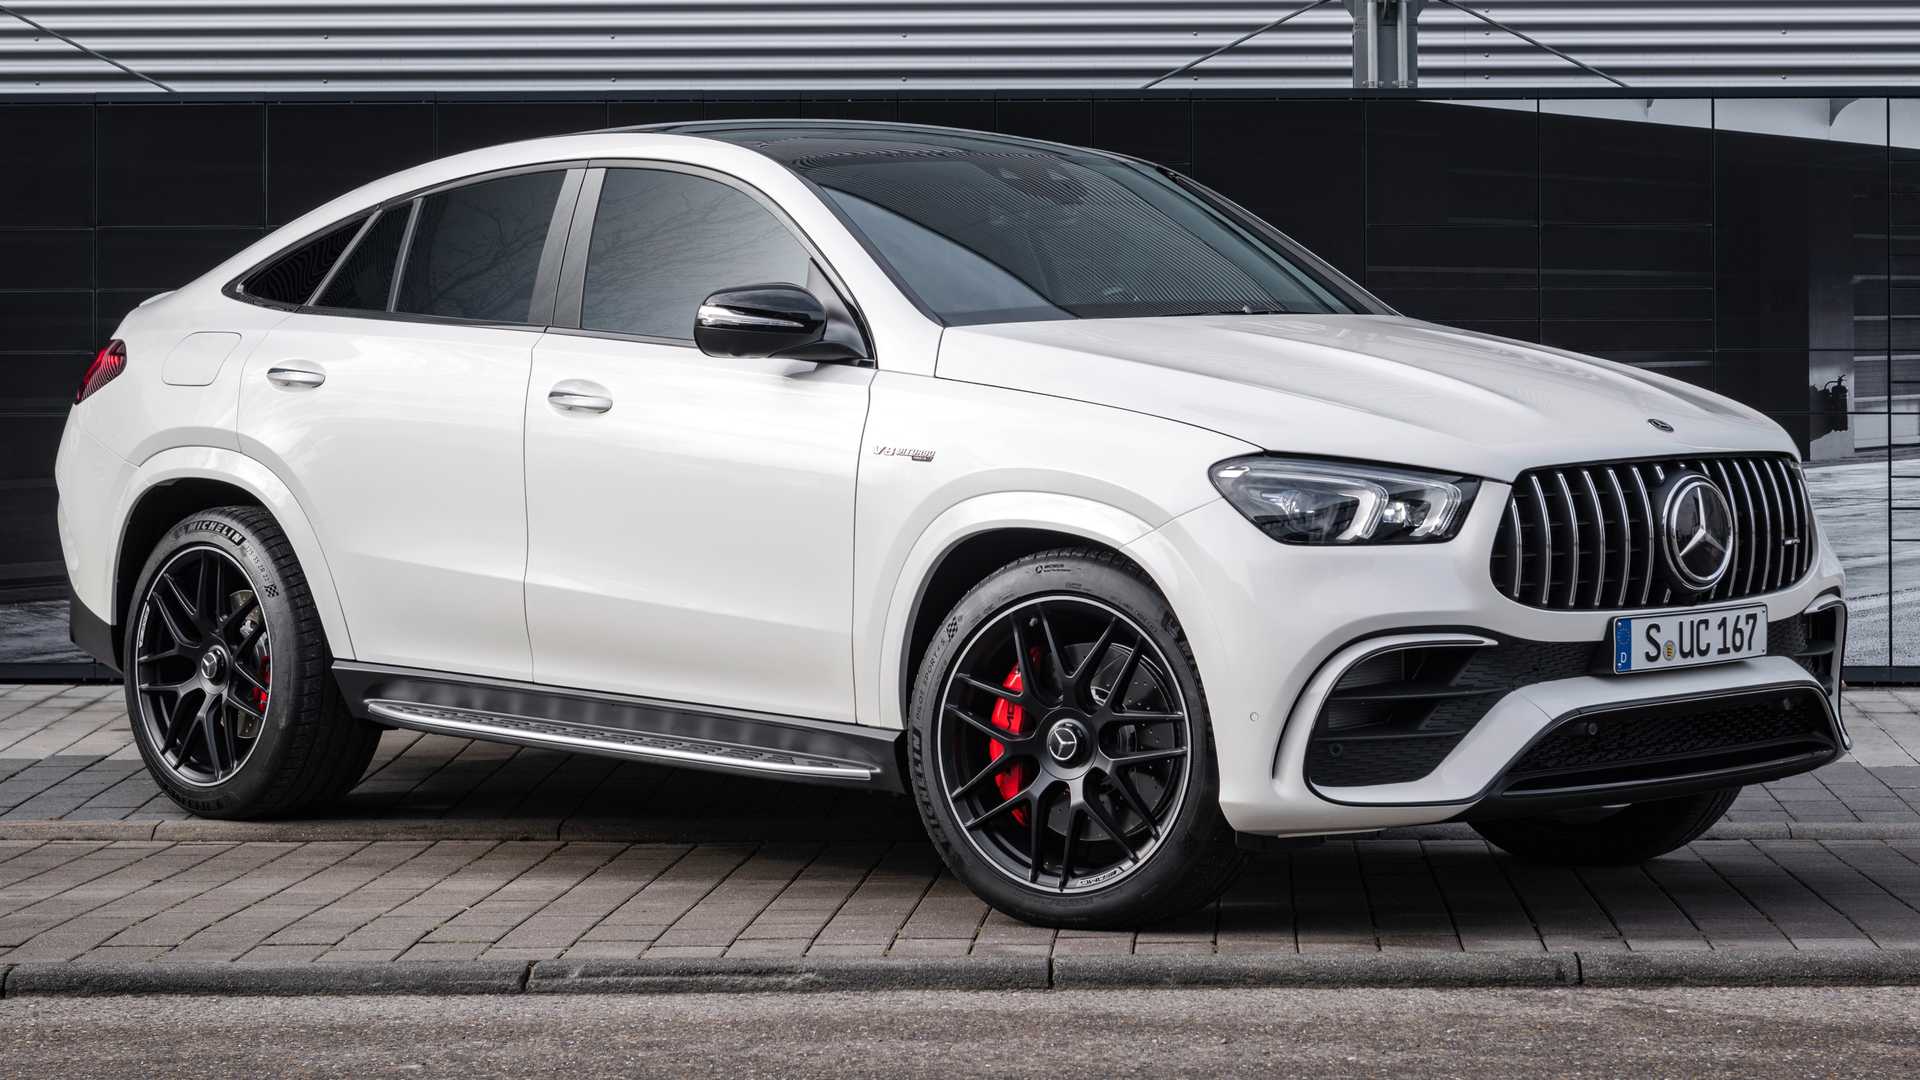 MERCEDES BENZ AMG GLE 43 4MATIC COUPE ▶ Impuesto Vehicular ≫